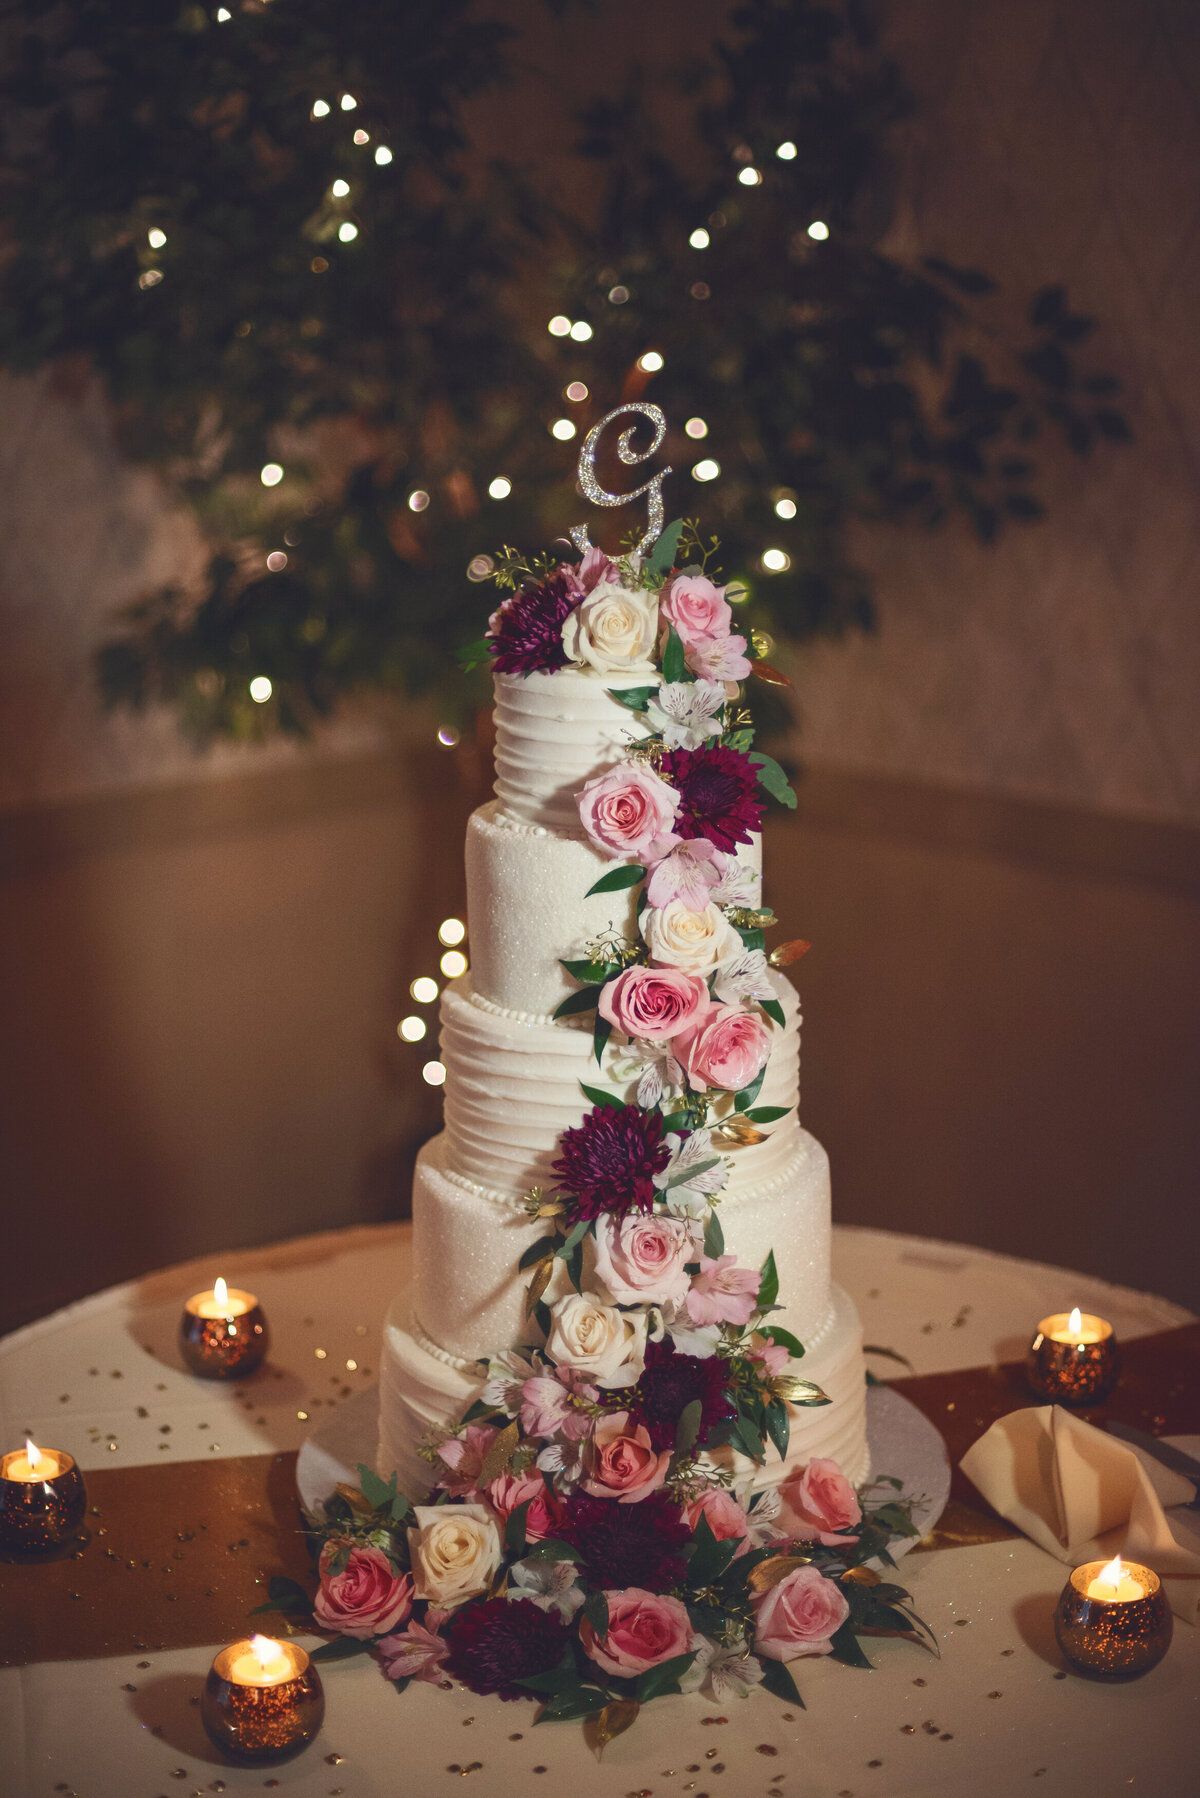 Wedding cake with pink and red roses by candles.